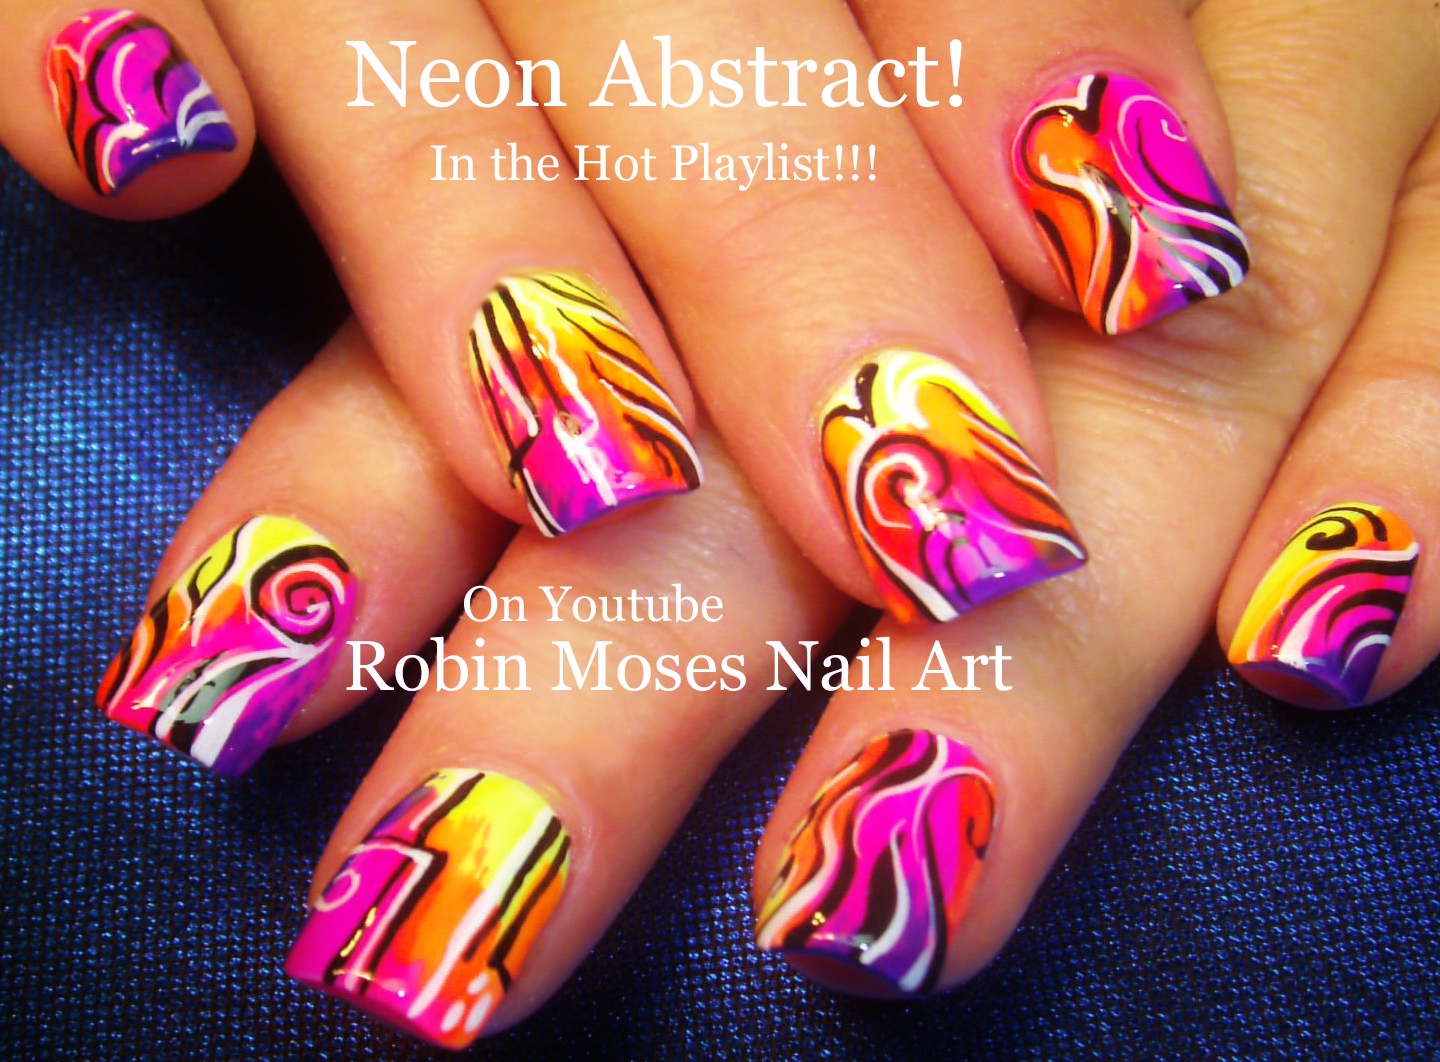 2. Best Neon Nail Designs for Summer - wide 5